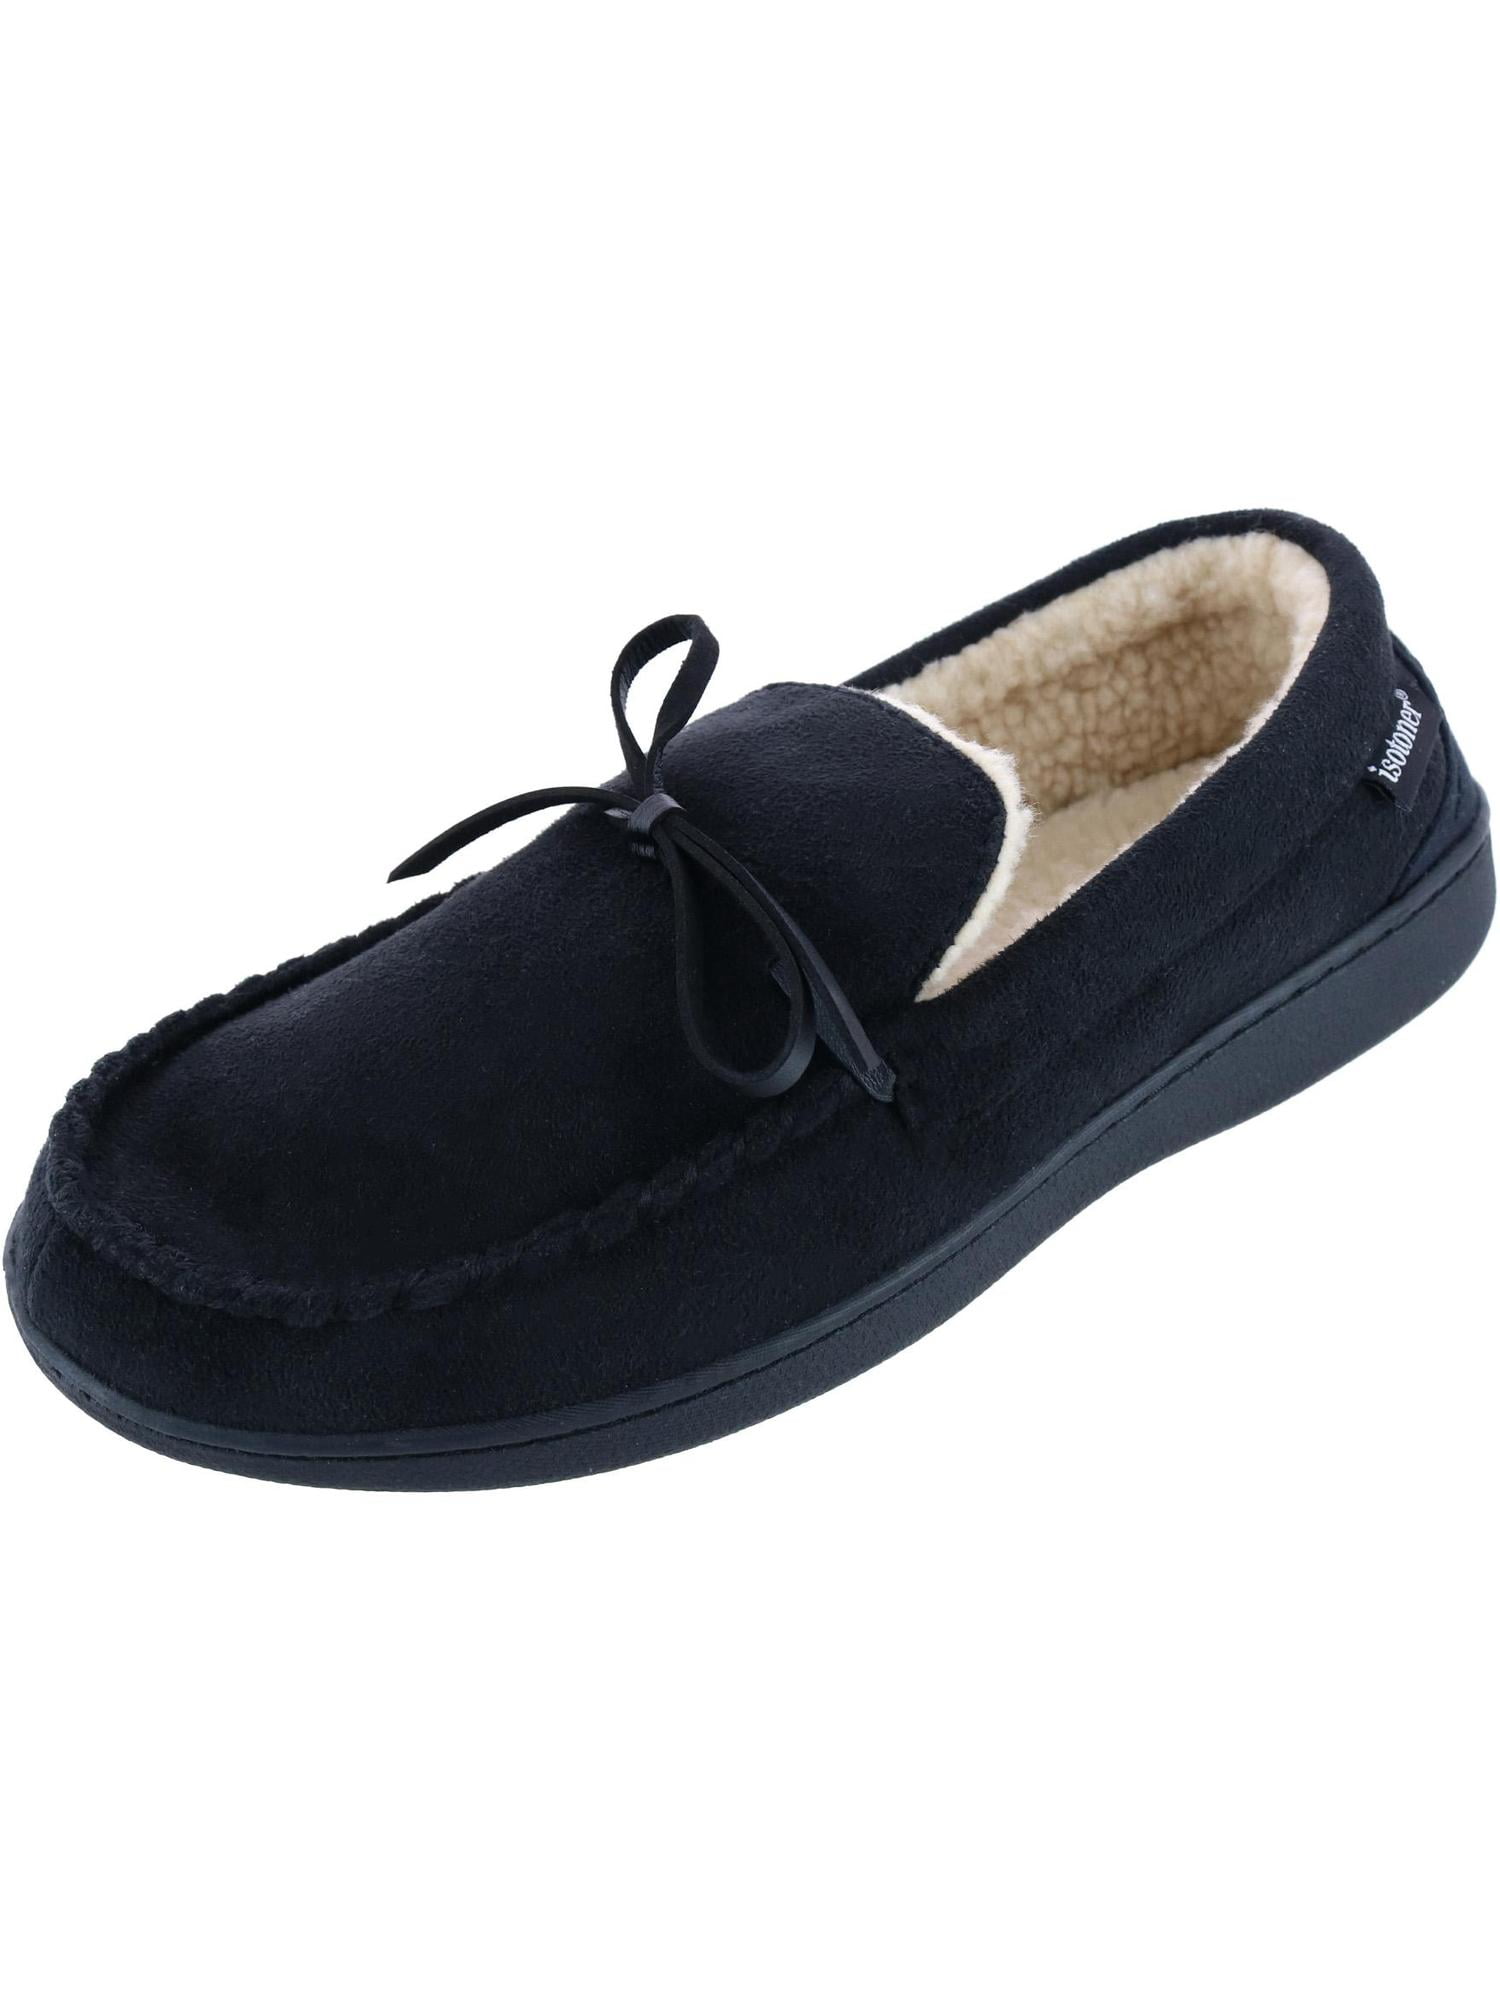 Brown OR Navy Size UK 6 7 8 9 10 11 12 Sleepers New Mens Gents Real Suede Moccasin Sand Slippers Sand 